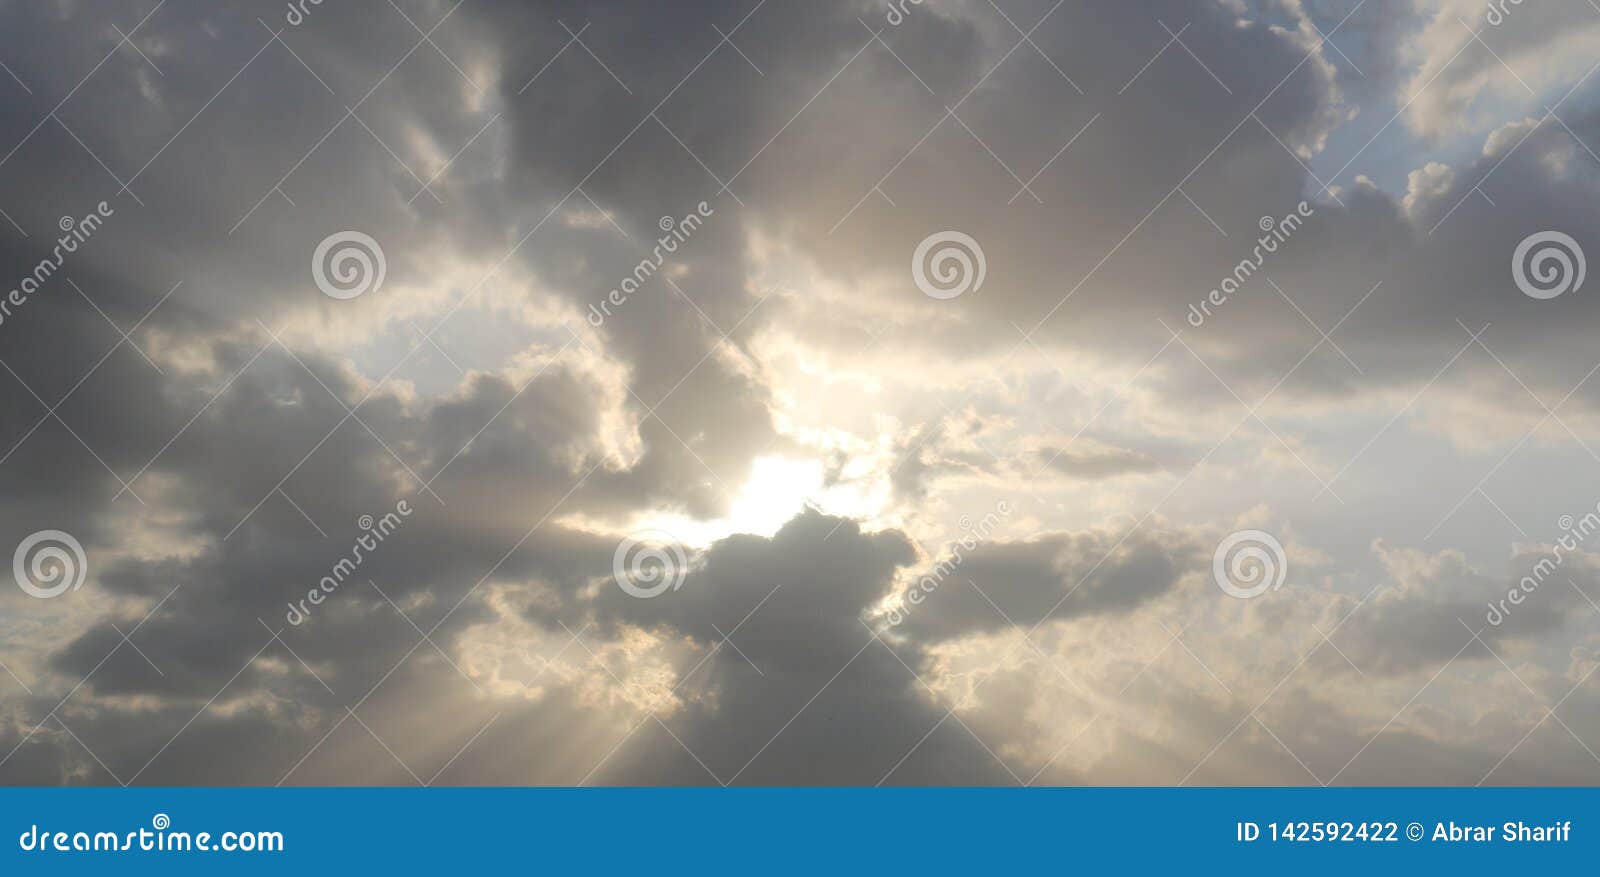 Dramatic blue cloudy sky with white sun rays breaking through the clouds over Dubai, UAE. Nature background. Hope concept.